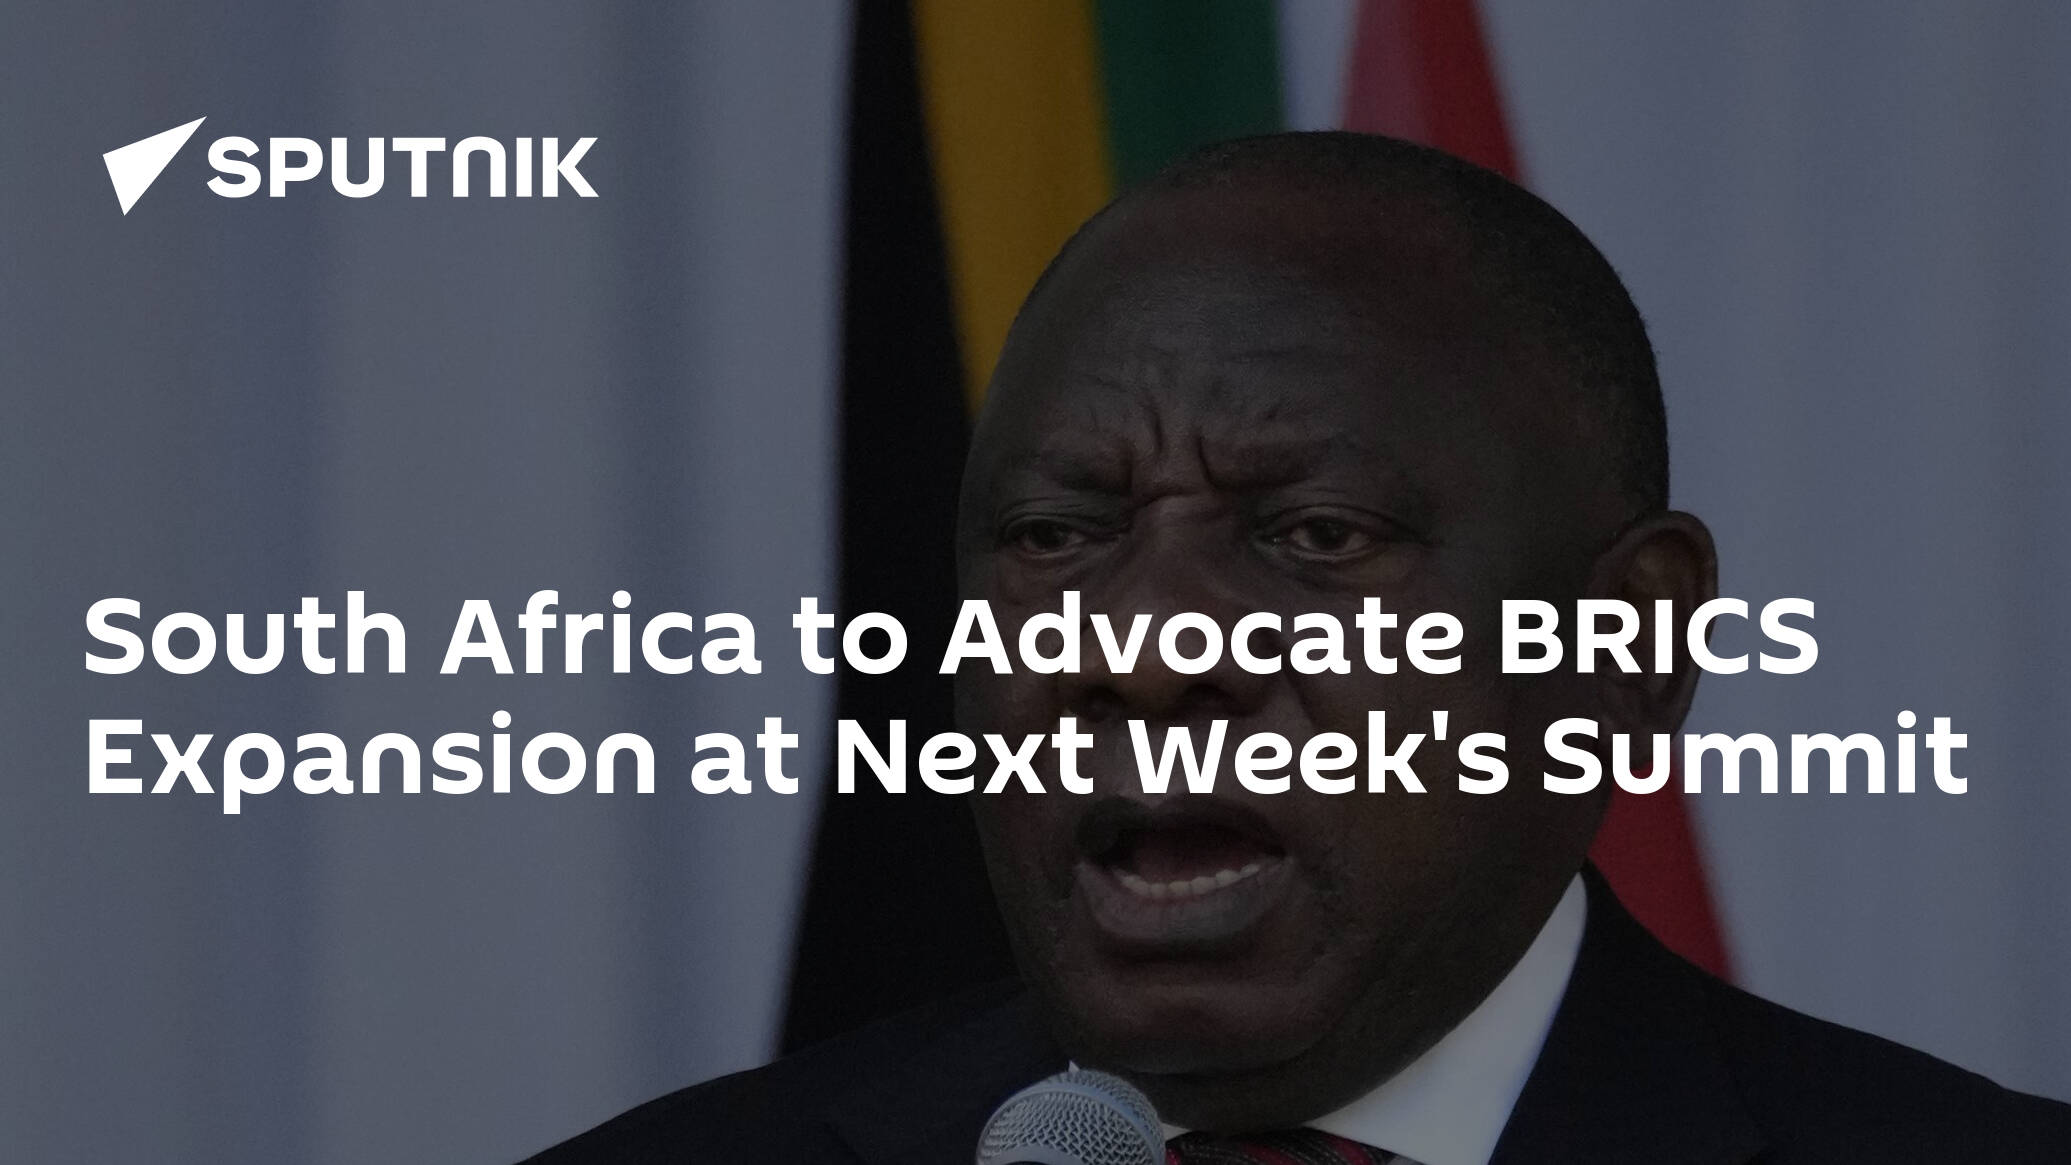 South Africa to Advocate BRICS Expansion at Next Week's Summit